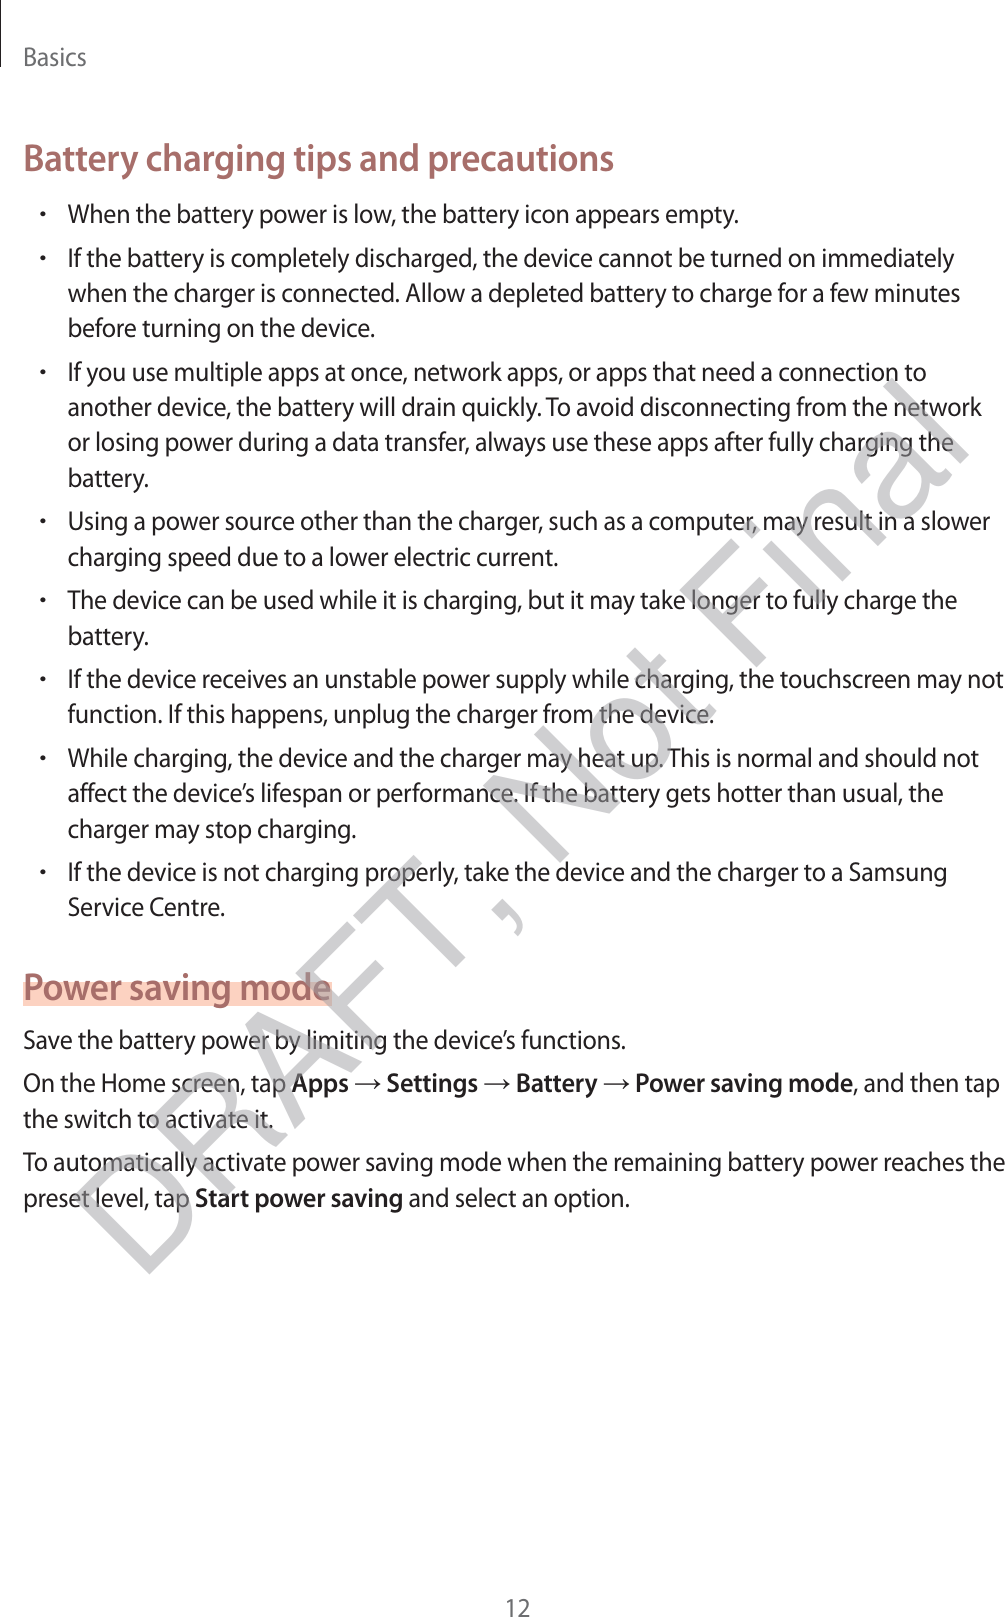 Basics12Battery charging tips and precautionsrWhen the battery power is low, the battery icon appears empty.rIf the battery is completely discharged, the device cannot be turned on immediately when the charger is connected. Allow a depleted battery to charge for a few minutes before turning on the device.rIf you use multiple apps at once, network apps, or apps that need a connection to another device, the battery will drain quickly. To avoid disconnecting from the network or losing power during a data transfer, always use these apps after fully charging the battery.rUsing a power source other than the charger, such as a computer, may result in a slower charging speed due to a lower electric current.rThe device can be used while it is charging, but it may take longer to fully charge the battery.rIf the device receives an unstable power supply while charging, the touchscreen may not function. If this happens, unplug the charger from the device.rWhile charging, the device and the charger may heat up. This is normal and should not affect the device’s lifespan or performance. If the battery gets hotter than usual, the charger may stop charging.rIf the device is not charging properly, take the device and the charger to a Samsung Service Centre.Power saving modeSave the battery power by limiting the device’s functions.On the Home screen, tap Apps → Settings → Battery → Power saving mode, and then tap the switch to activate it.To automatically activate power saving mode when the remaining battery power reaches the preset level, tap Start power saving and select an option.DRAFT, Not Final